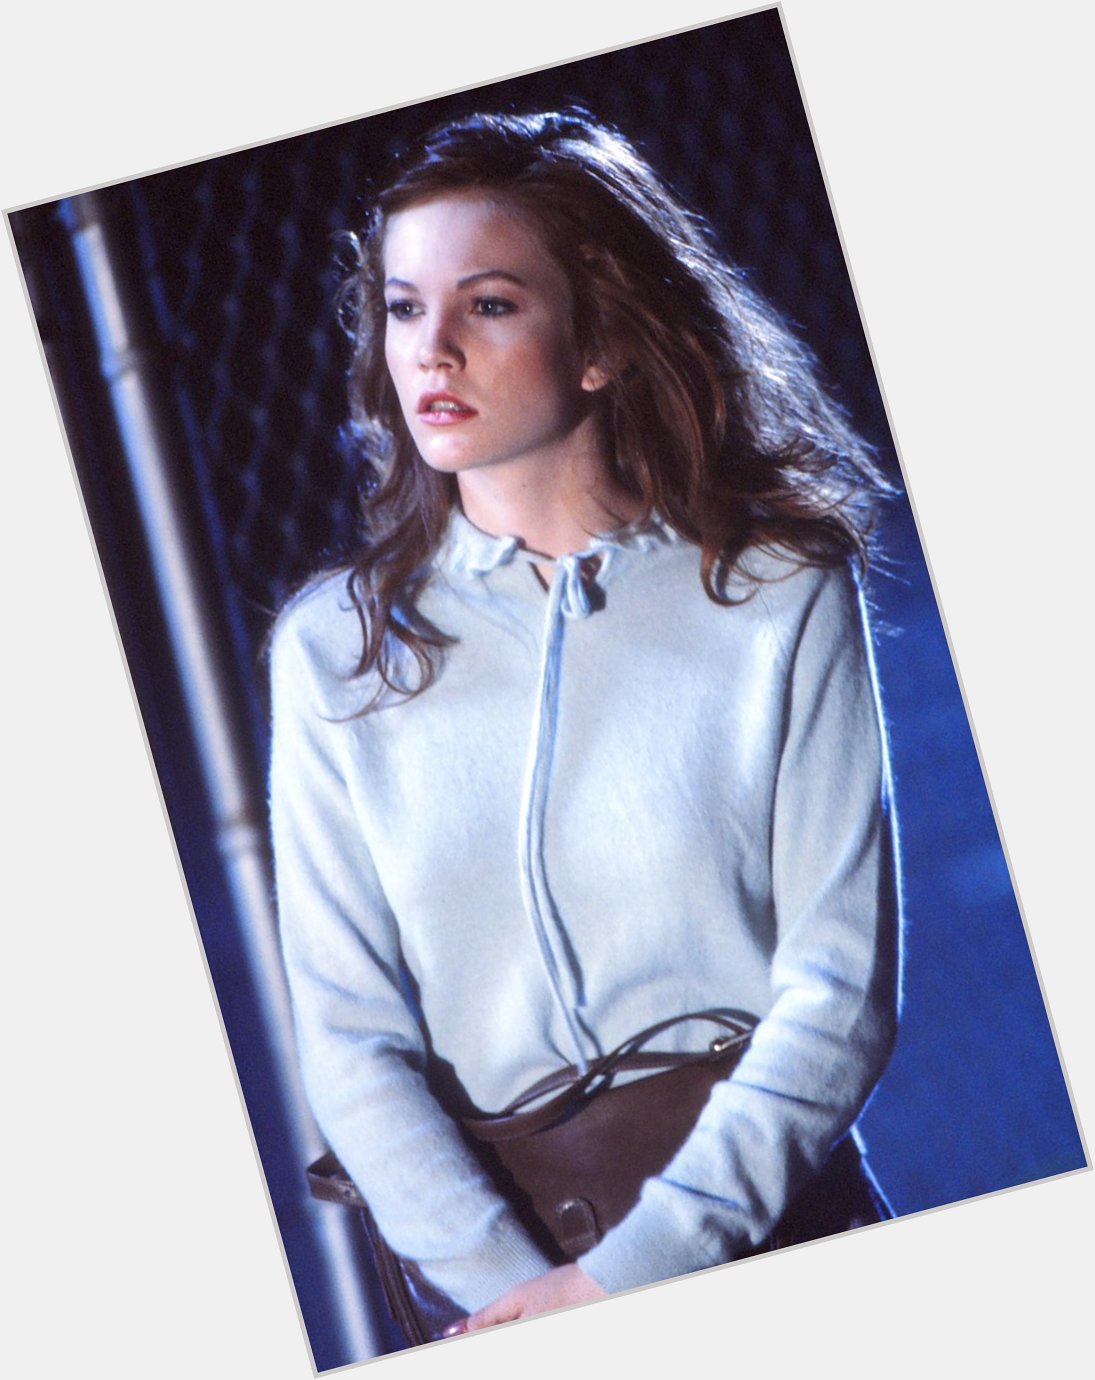 Happy Birthday, Diane Lane! Born on this day in 1965. Seen here as Cherry Valance in The Outsiders (1983) Stay Gold. 